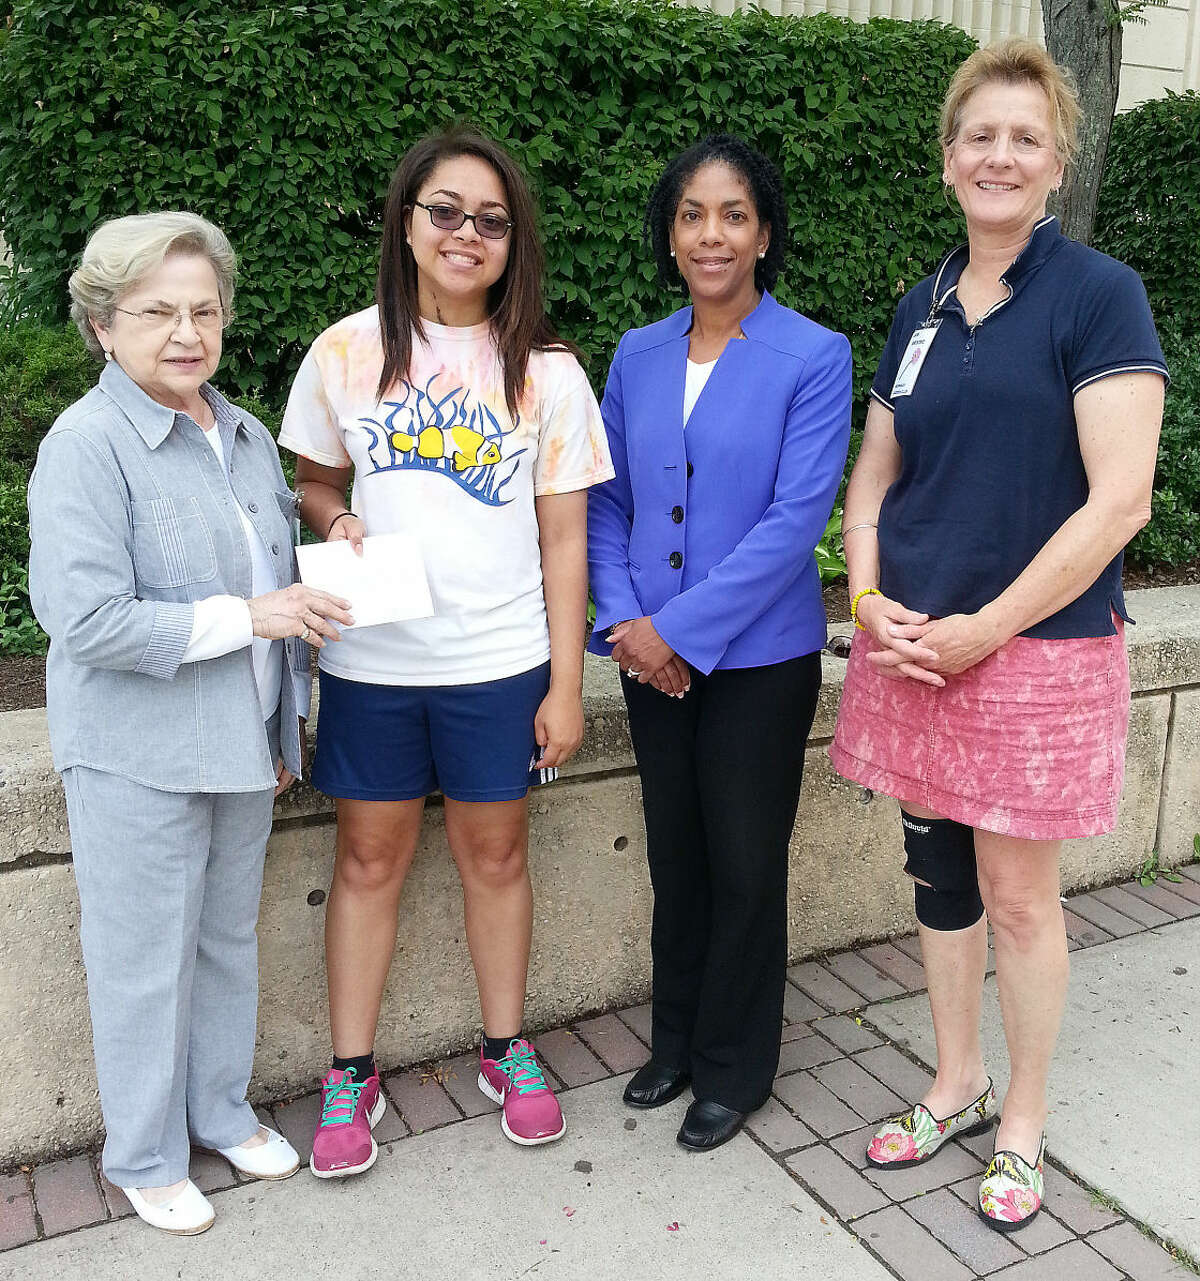 Contributed photo The Norwalk Garden Club presented a scholarship for $1,000 to Amanda Turner recently. Pictured from the left are: Janet Valus (Scholarship Committee); Amanda Turner; Mrs. Turner; and Jan Broome, President. Not pictured is Barbara Thompson (Scholarship Committee).